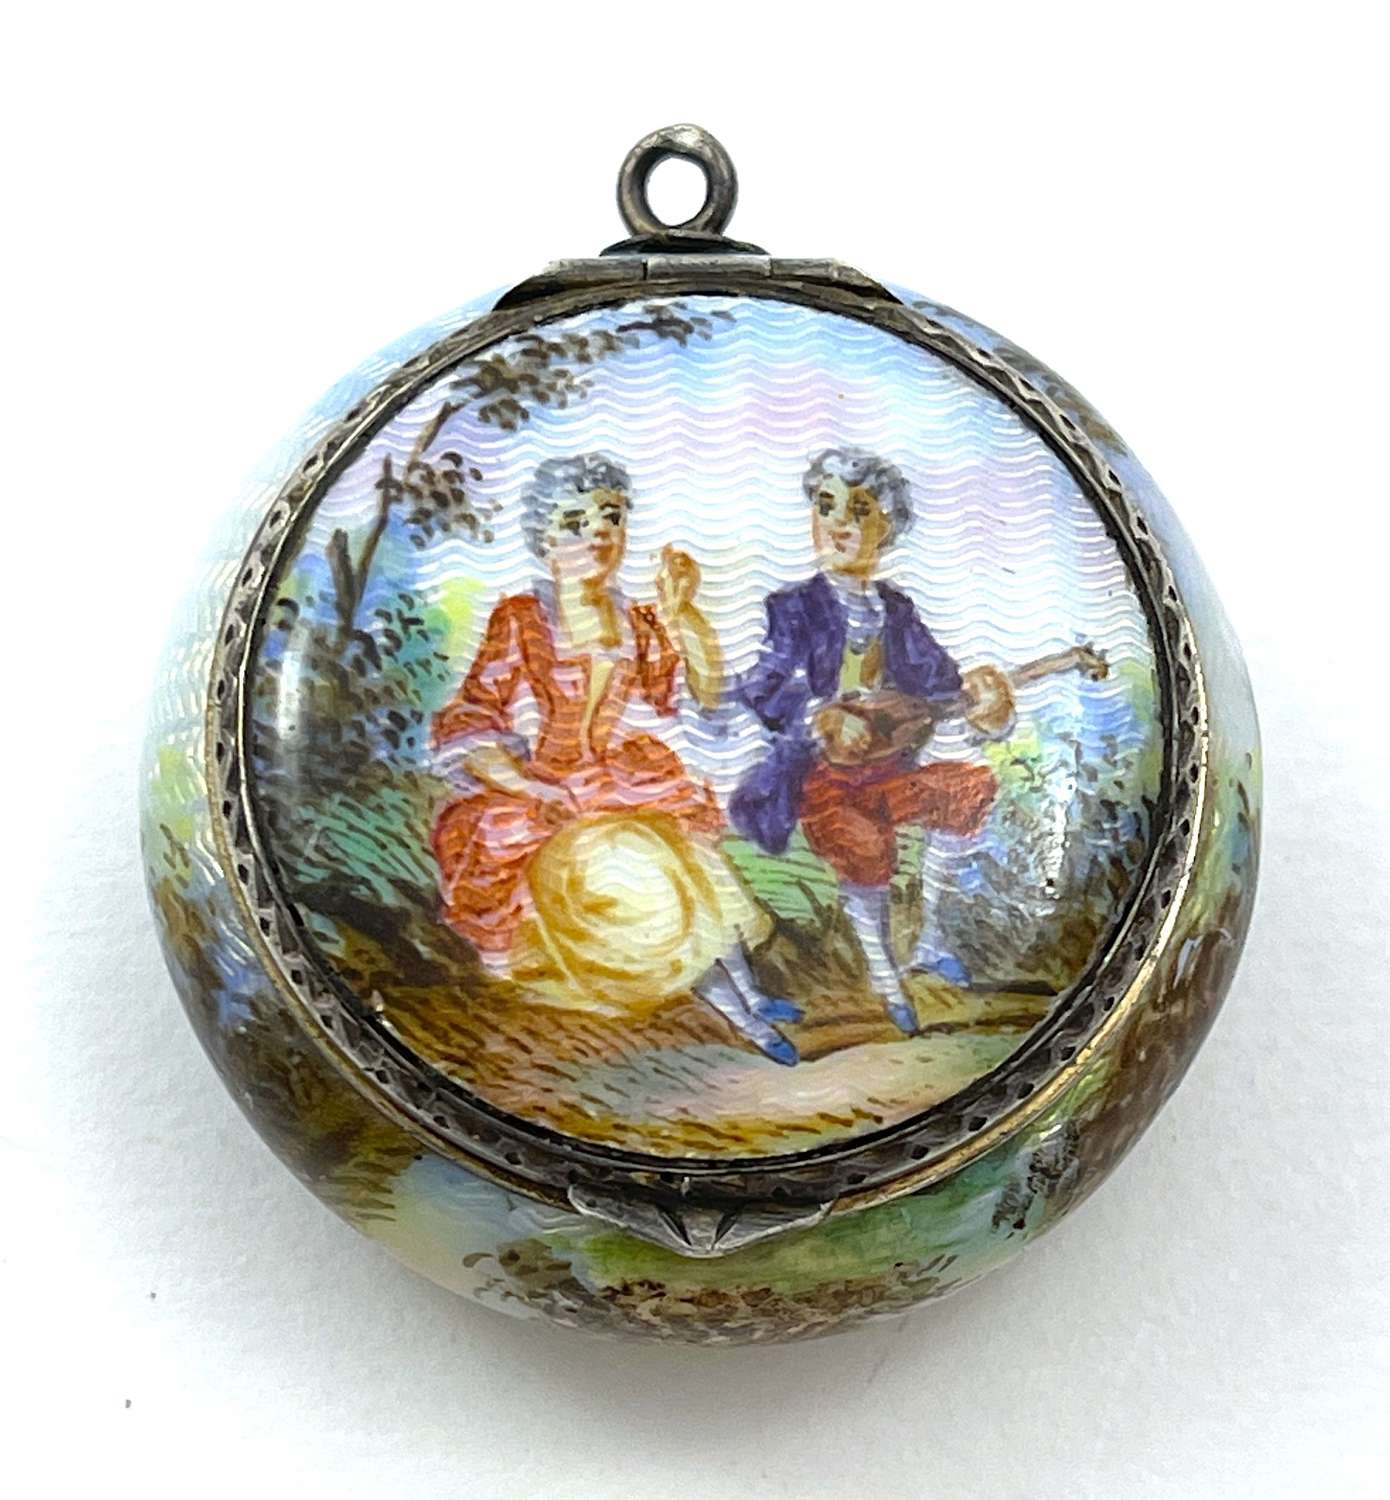 Lovely Antique French Miniature Guilloche Enamel and Silver Compact